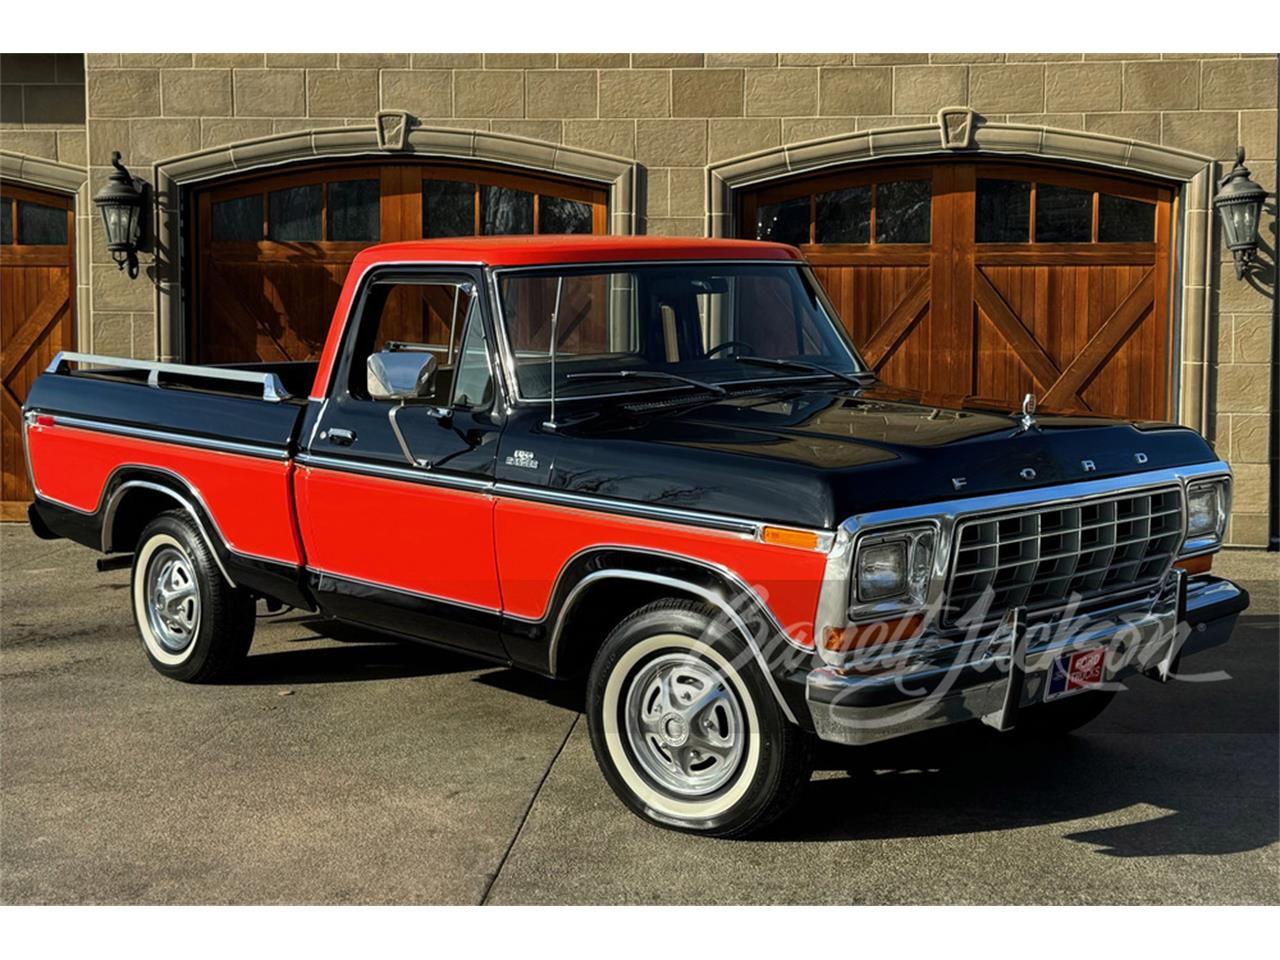 For Sale at Auction: 1979 Ford F100 in Scottsdale, Arizona for sale in Scottsdale, AZ